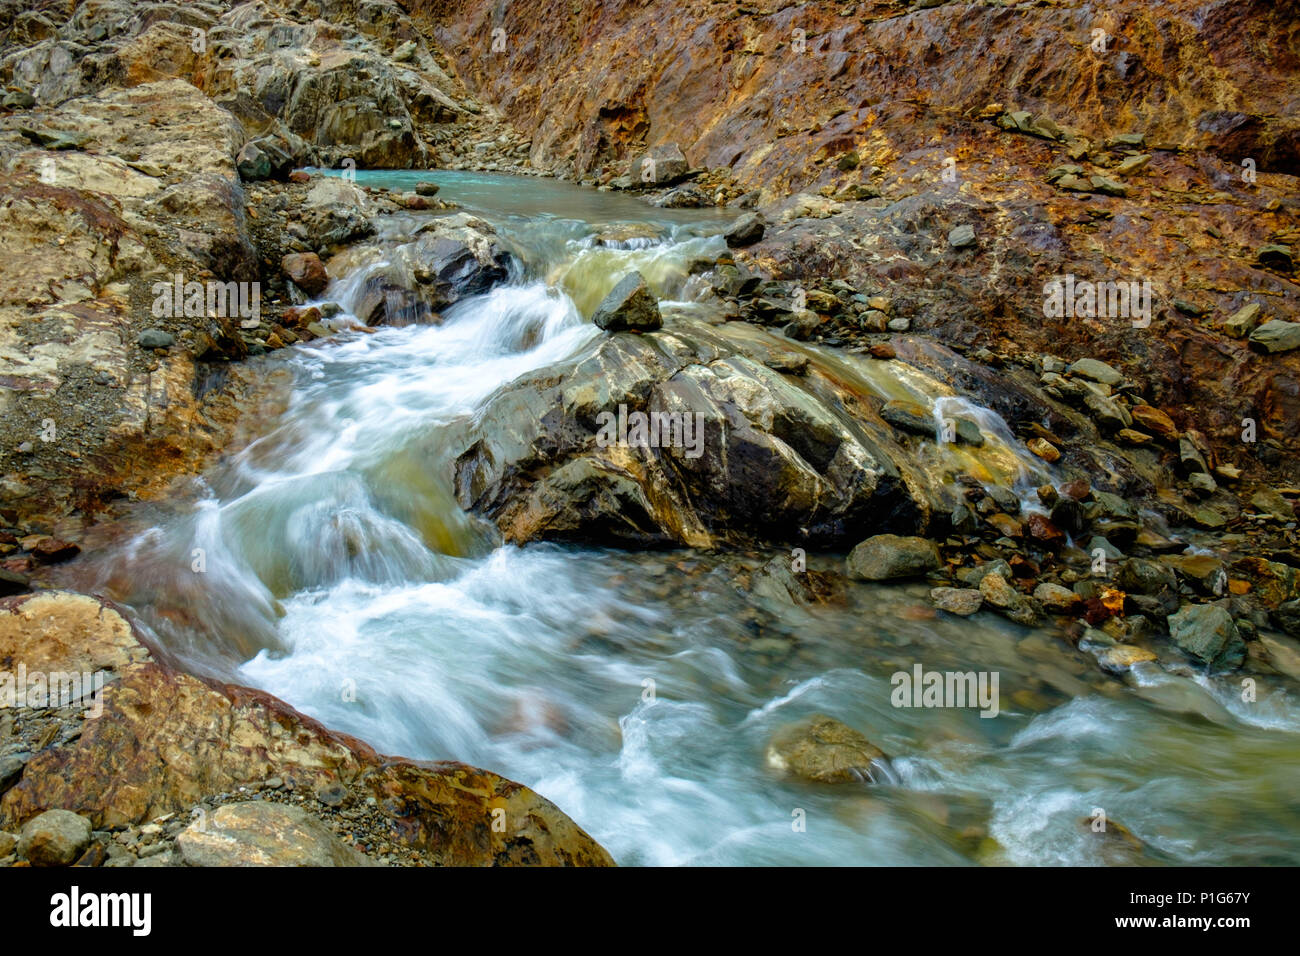 Glacial meltwater descends in between stunning, colorful rocks towards the 'Laguna de los Témpanos' near Ushuaia. It looks like a Martian landscape. Stock Photo